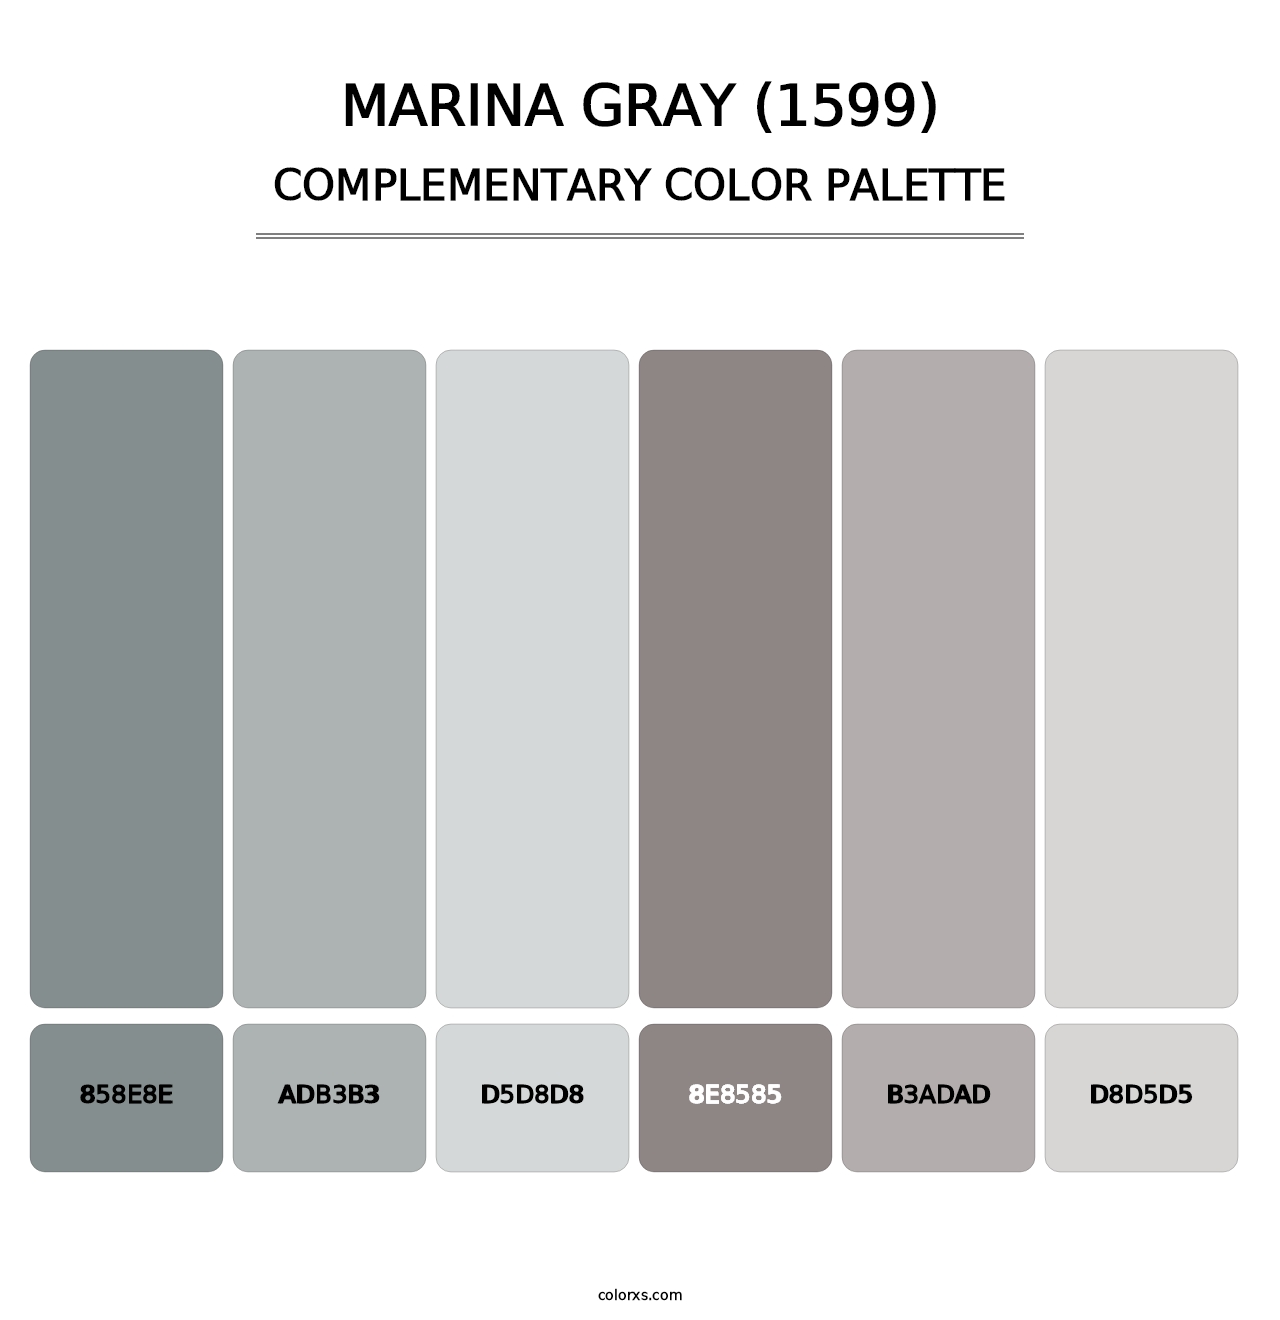 Marina Gray (1599) - Complementary Color Palette